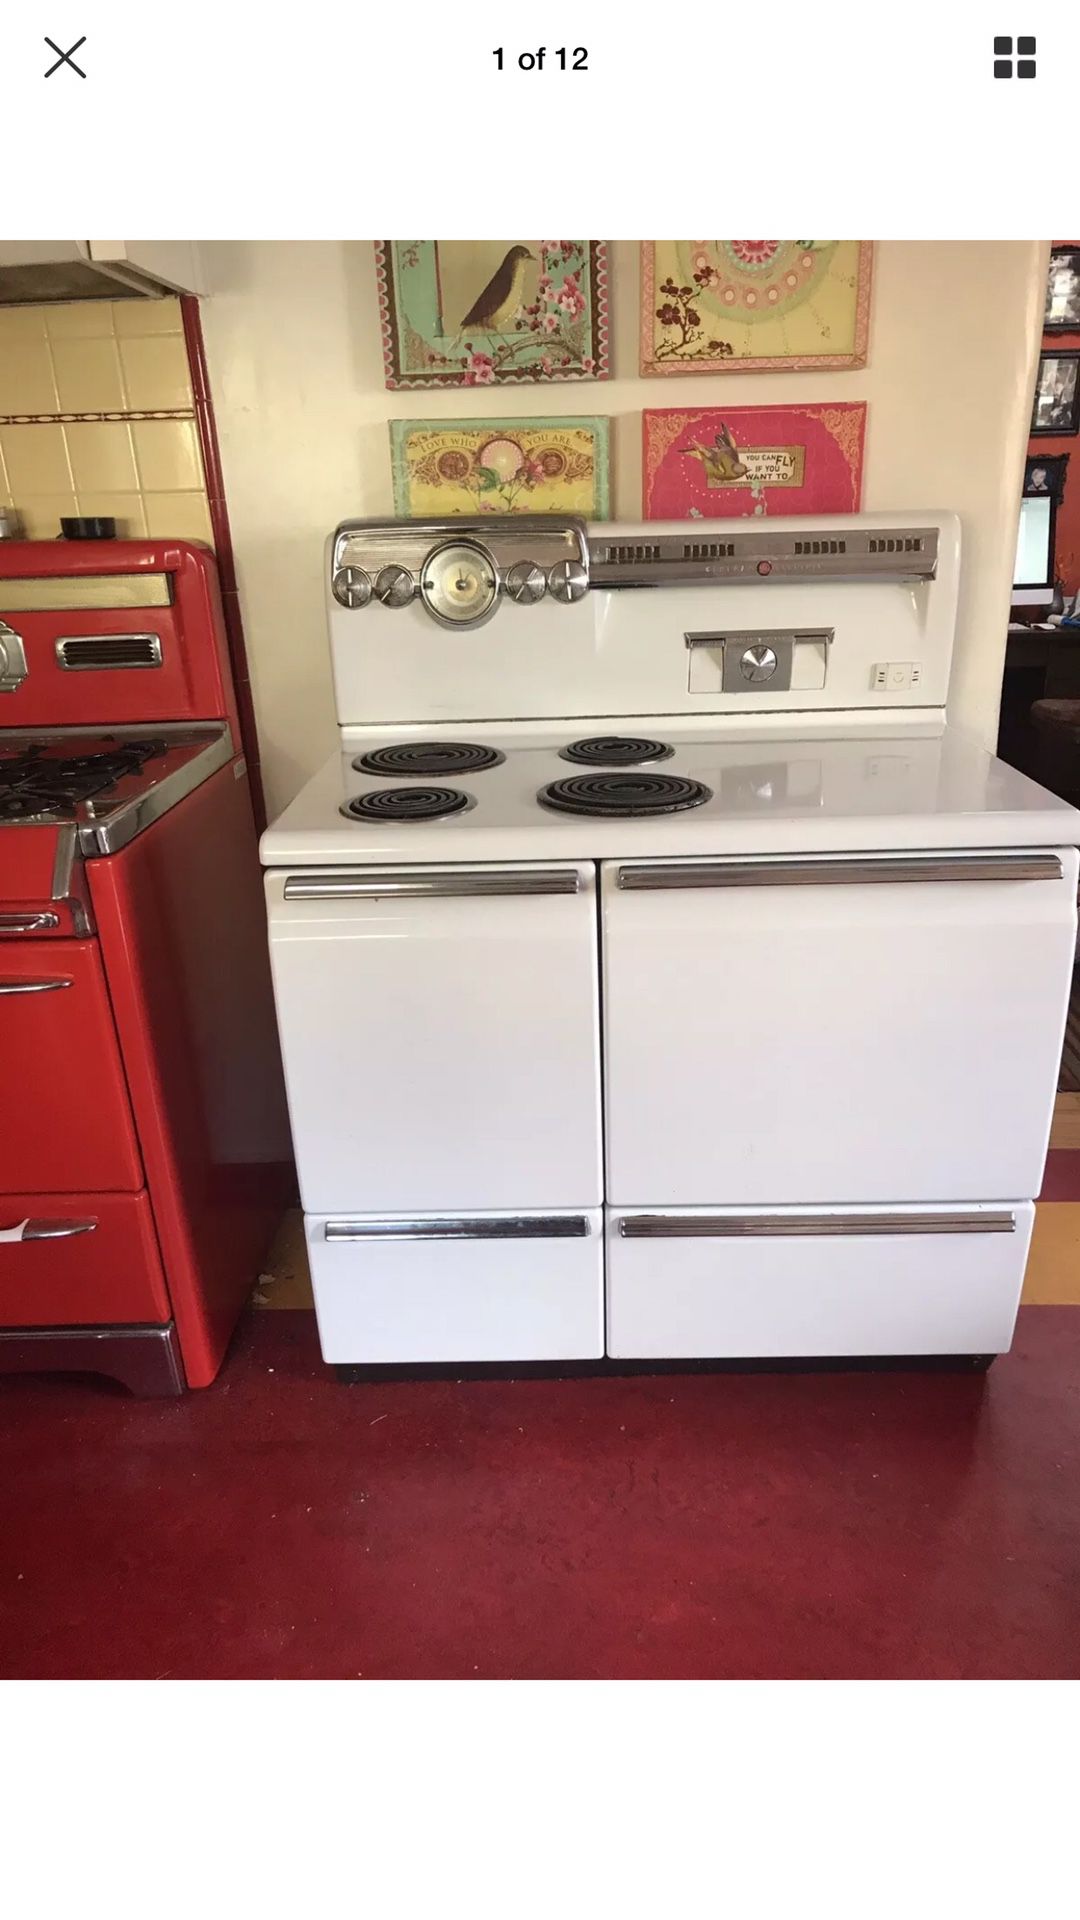 Vintage 1950s Oven Stove General Electric 1954